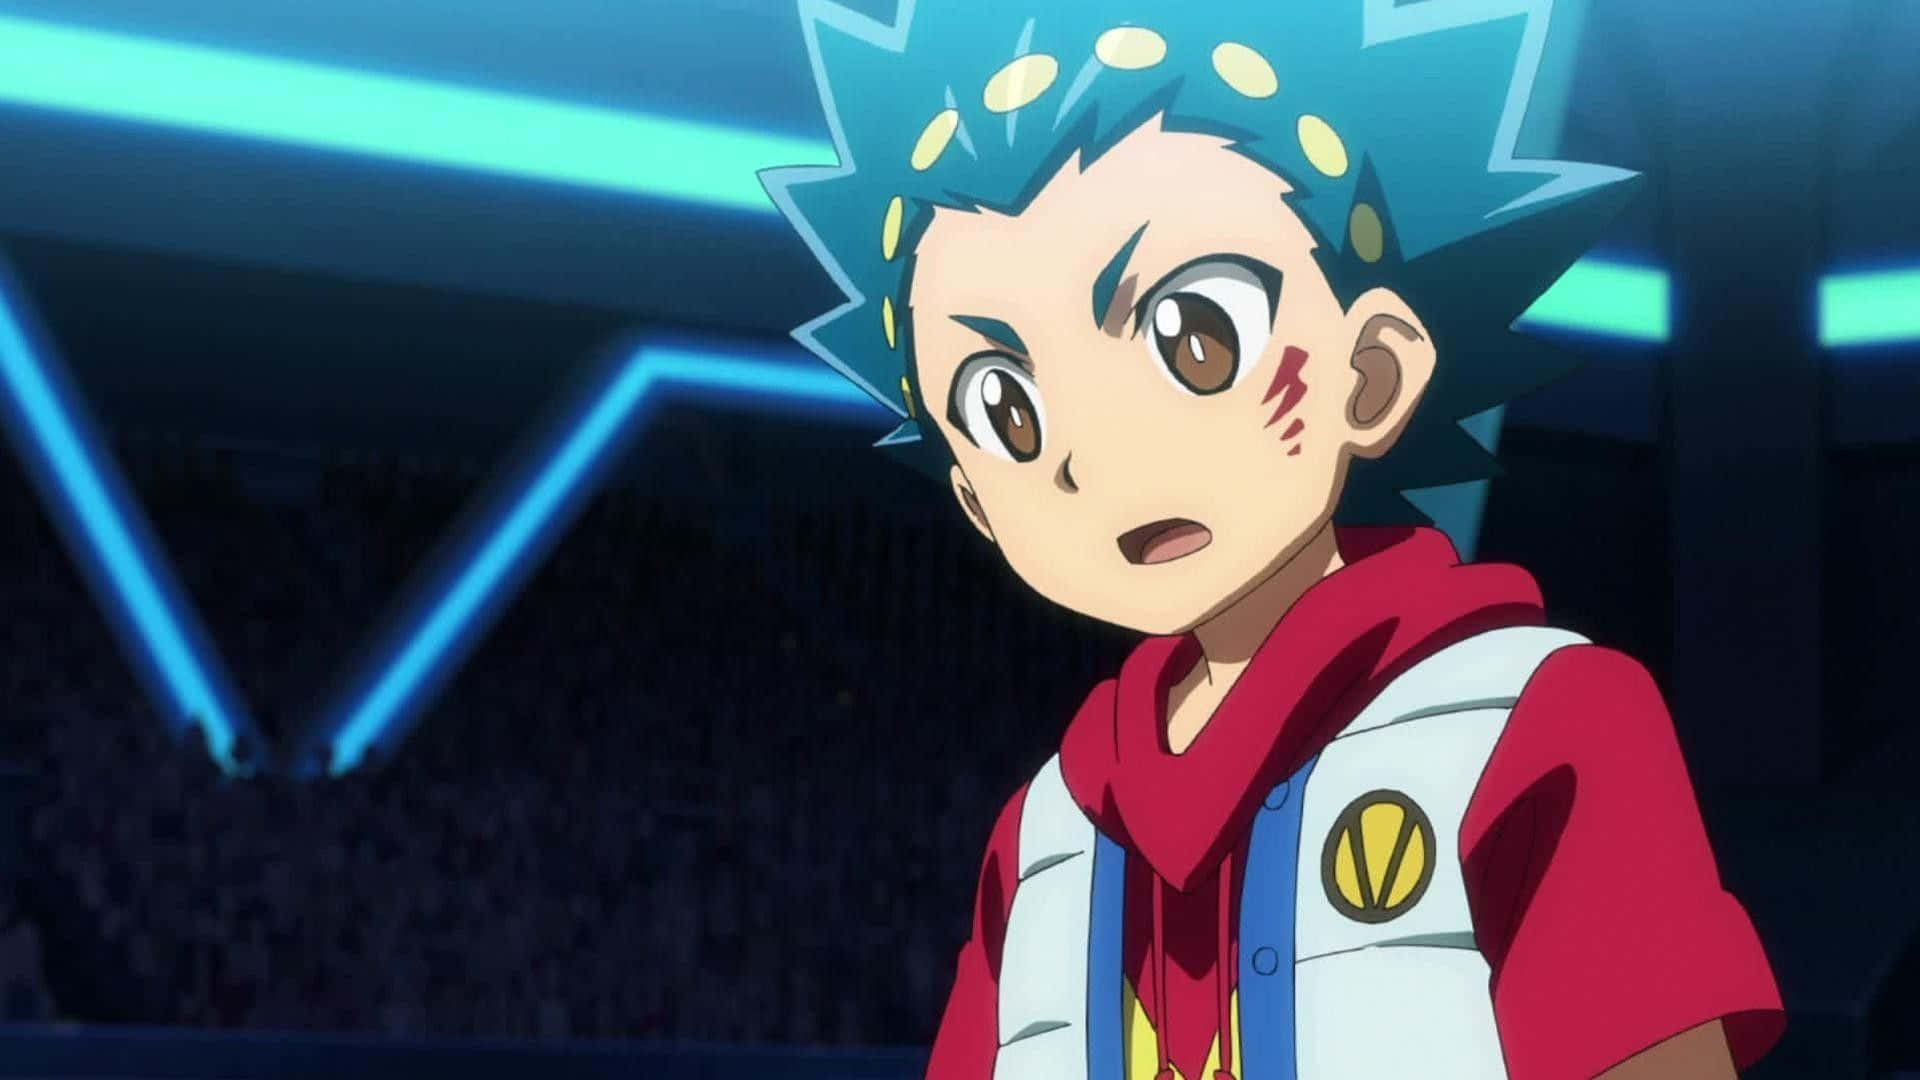 Koga battles Ryuga in the Beyblade battle that will decide the fate of their legacies.